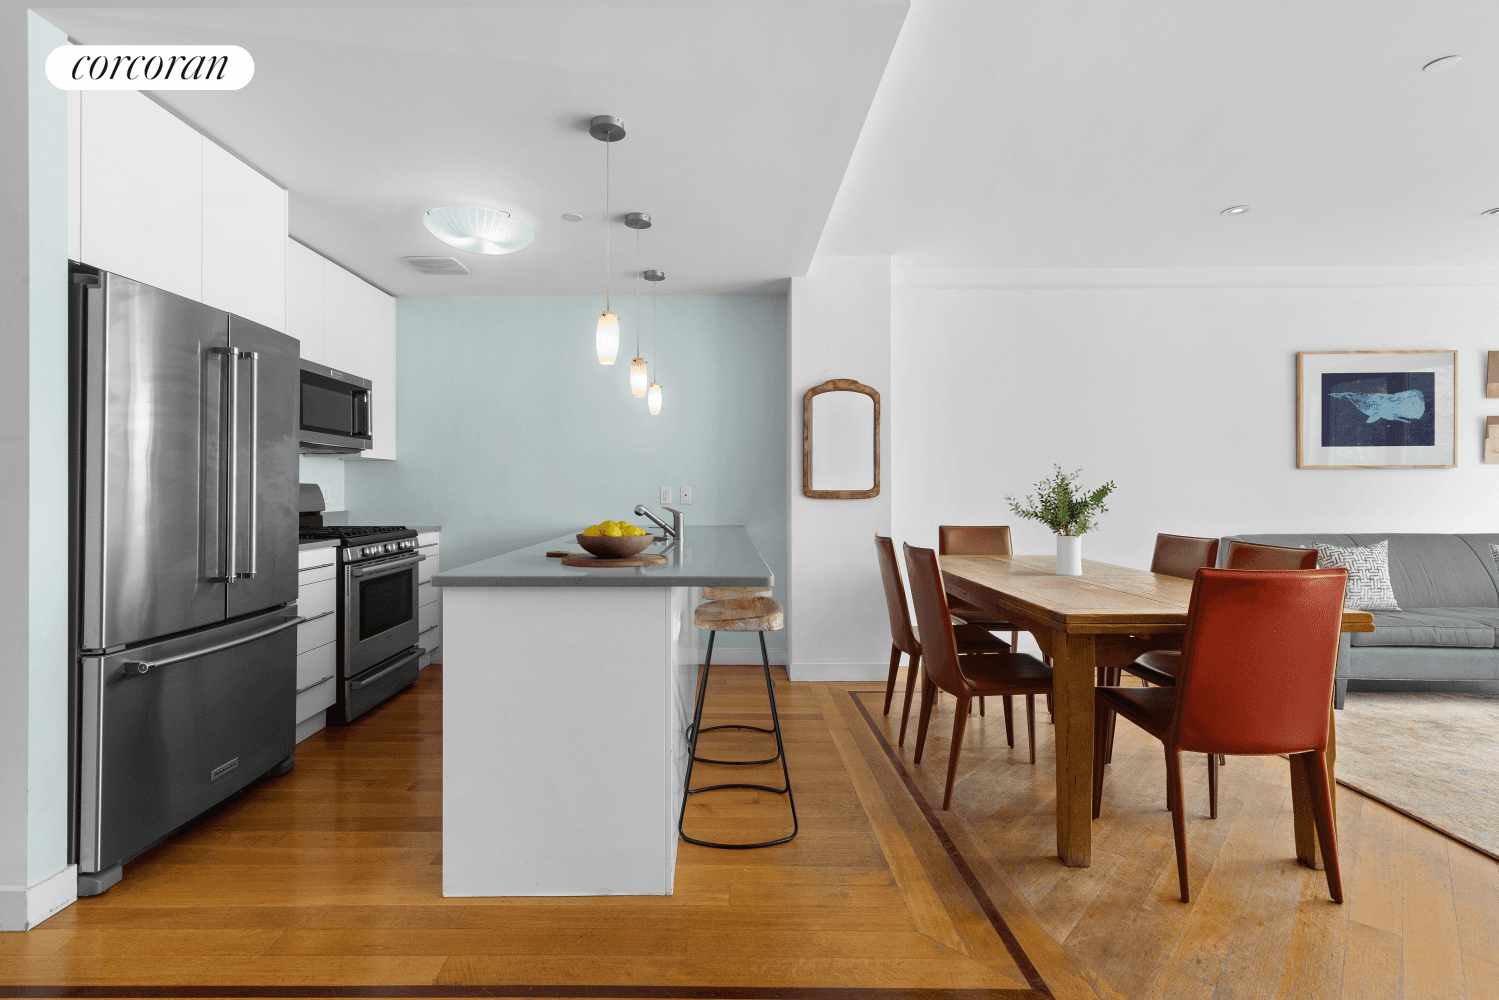 Welcome to 122 Adelphi Street 2B the rarest of offerings with three bedrooms, two bathrooms and a keyed elevator opening directly into the sun splashed apartment !